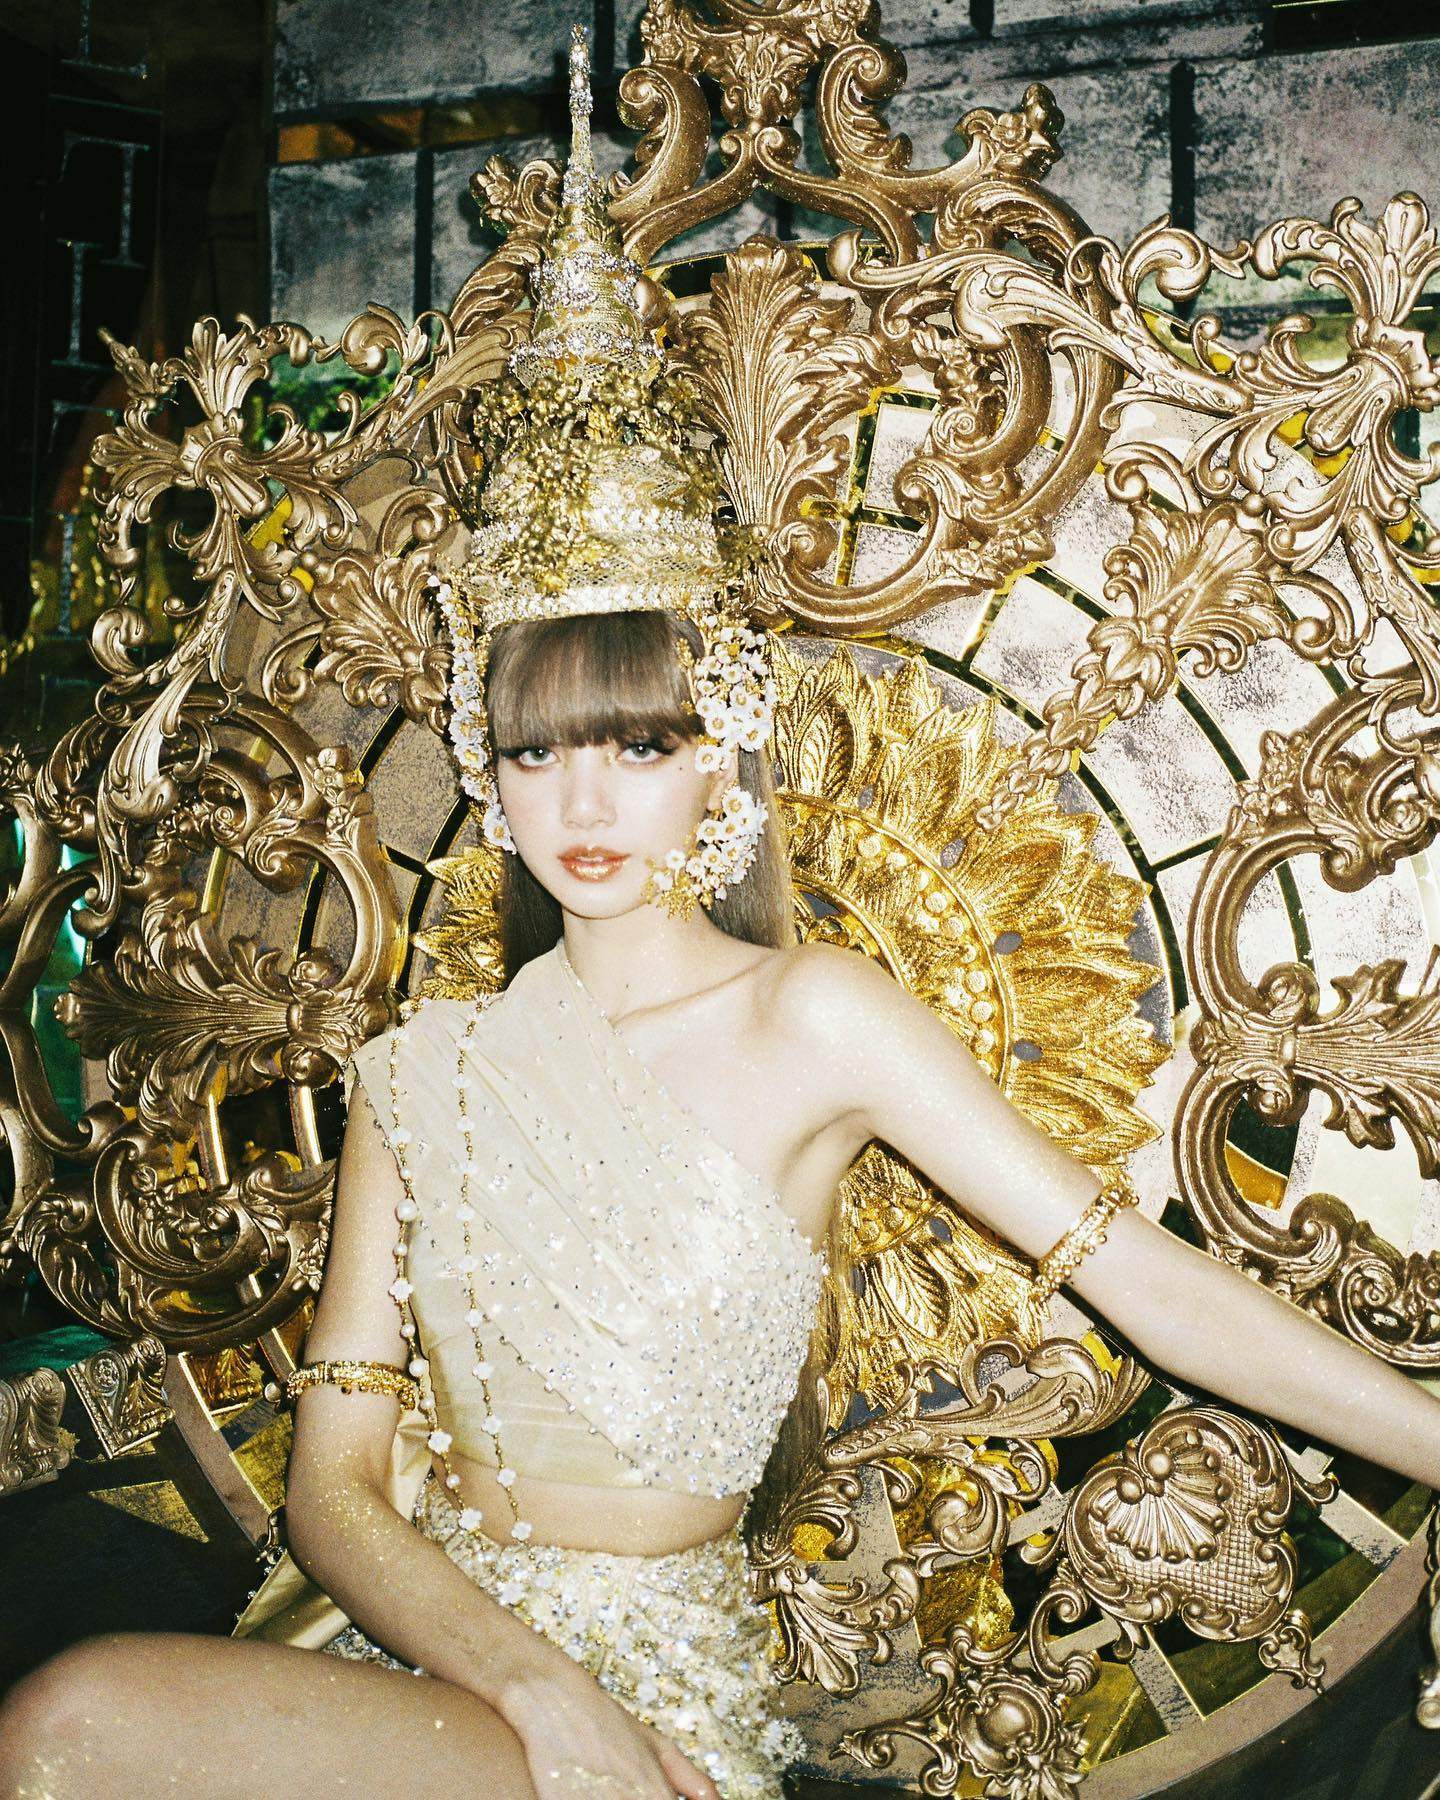 Blackpink’s Lisa delighted fans back home when she dropped her Thai-inspired music video for Lalisa. Photo: @sooyaaa___/Instagram